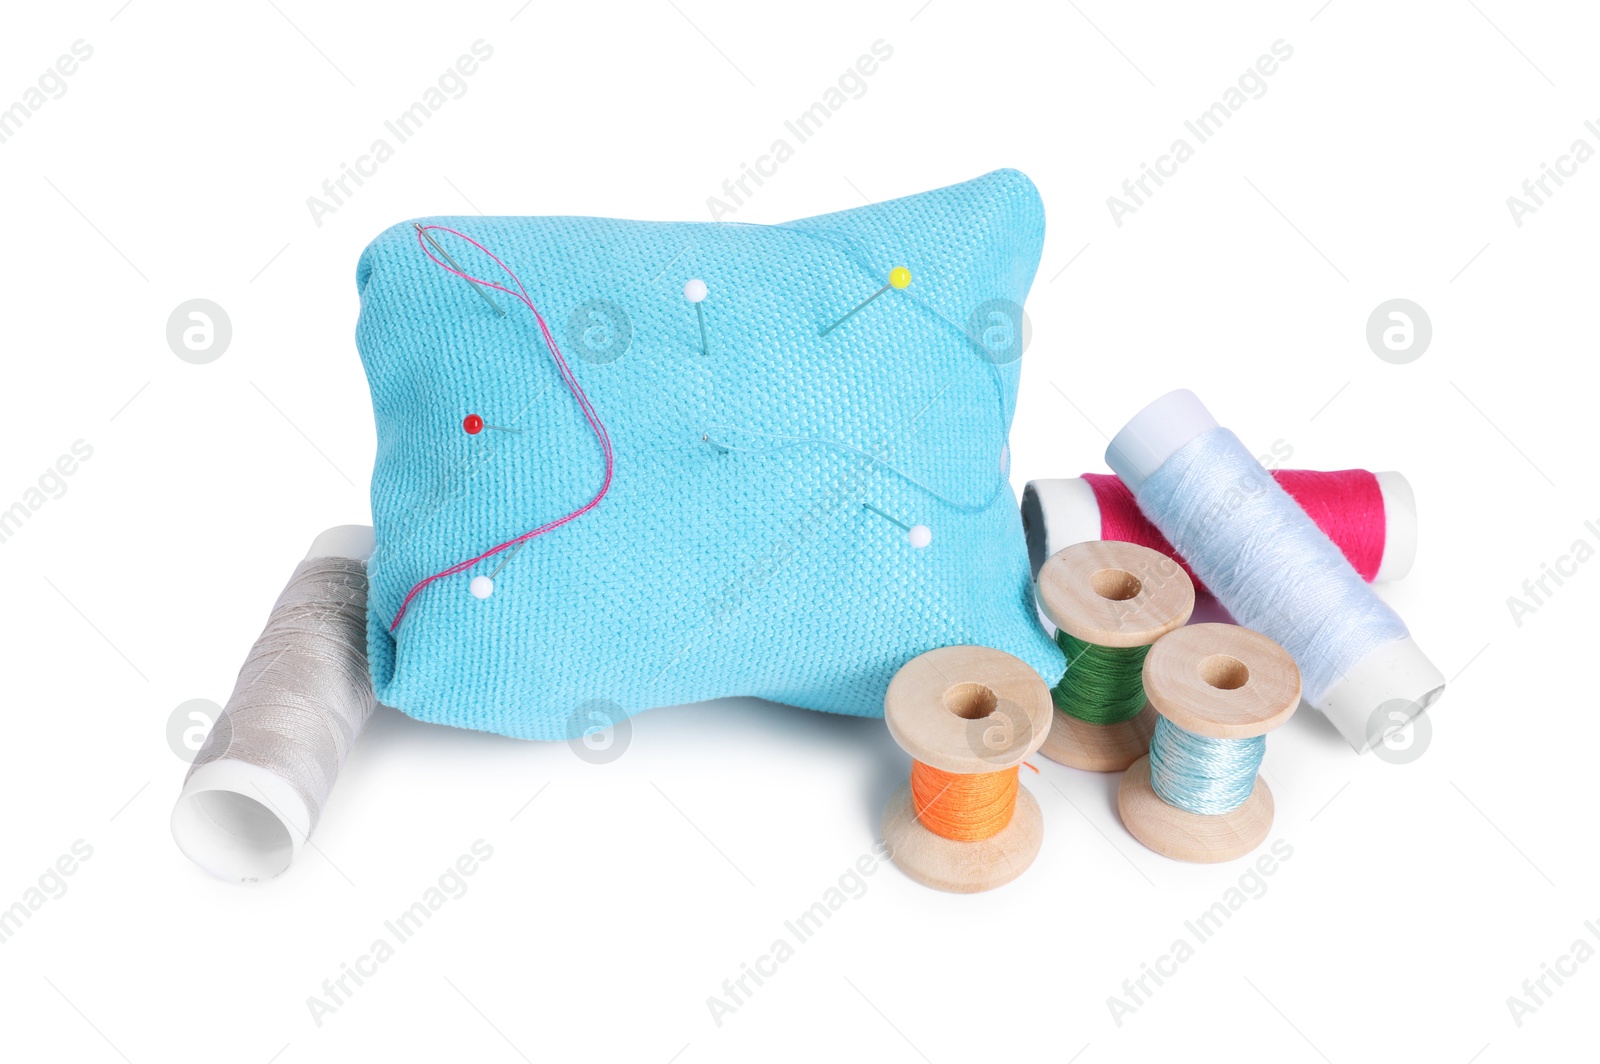 Photo of Pincushion, sewing pins, needle and spools of threads isolated on white